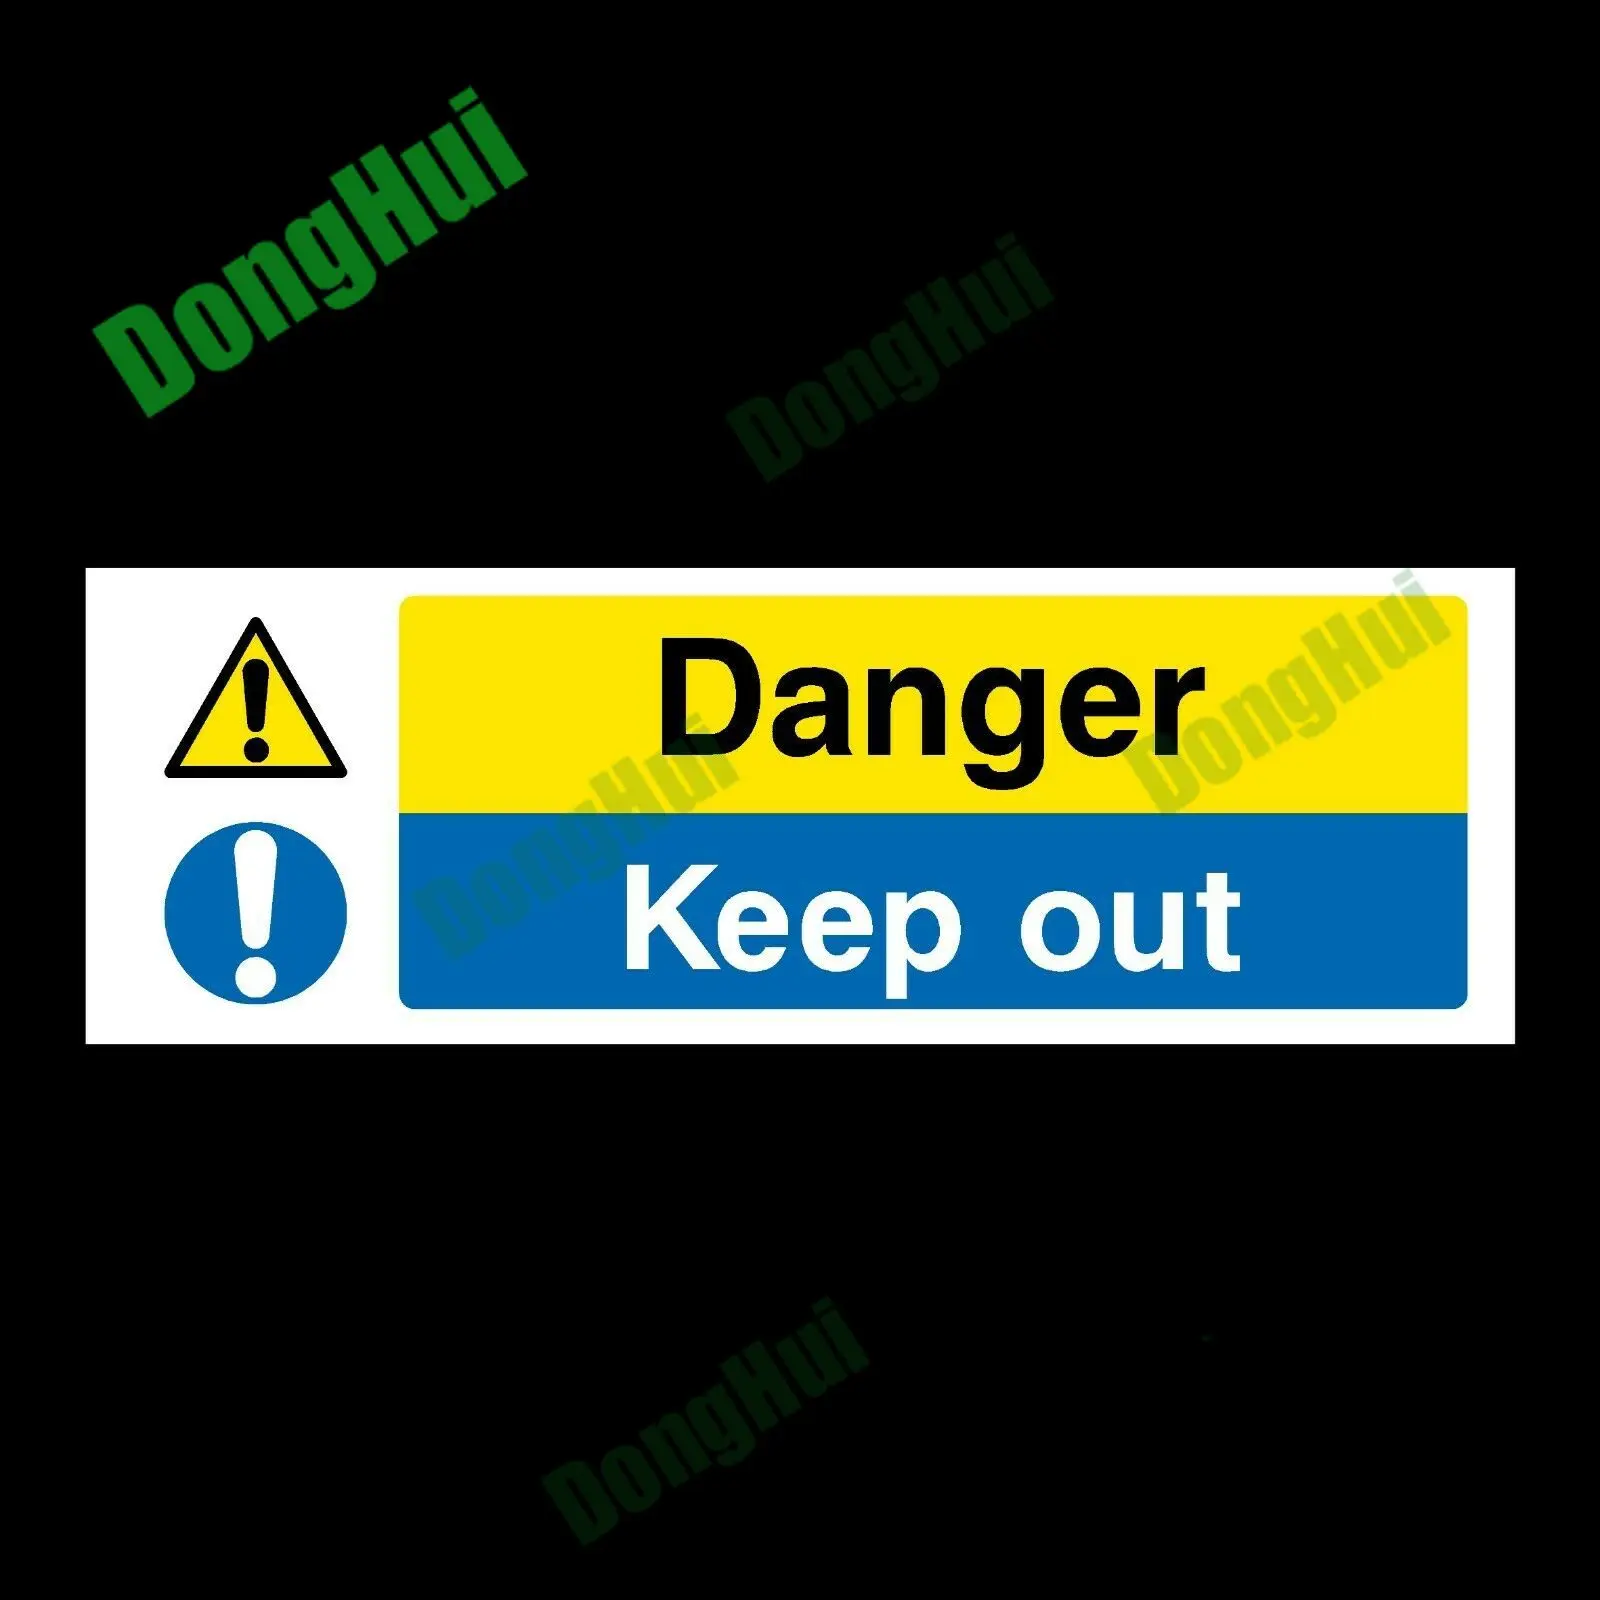 

Danger Keep Out Warning Caution Plastic Sign OR Sticker PVC Waterproof Car Sticker Car Window Decal Construction Sites